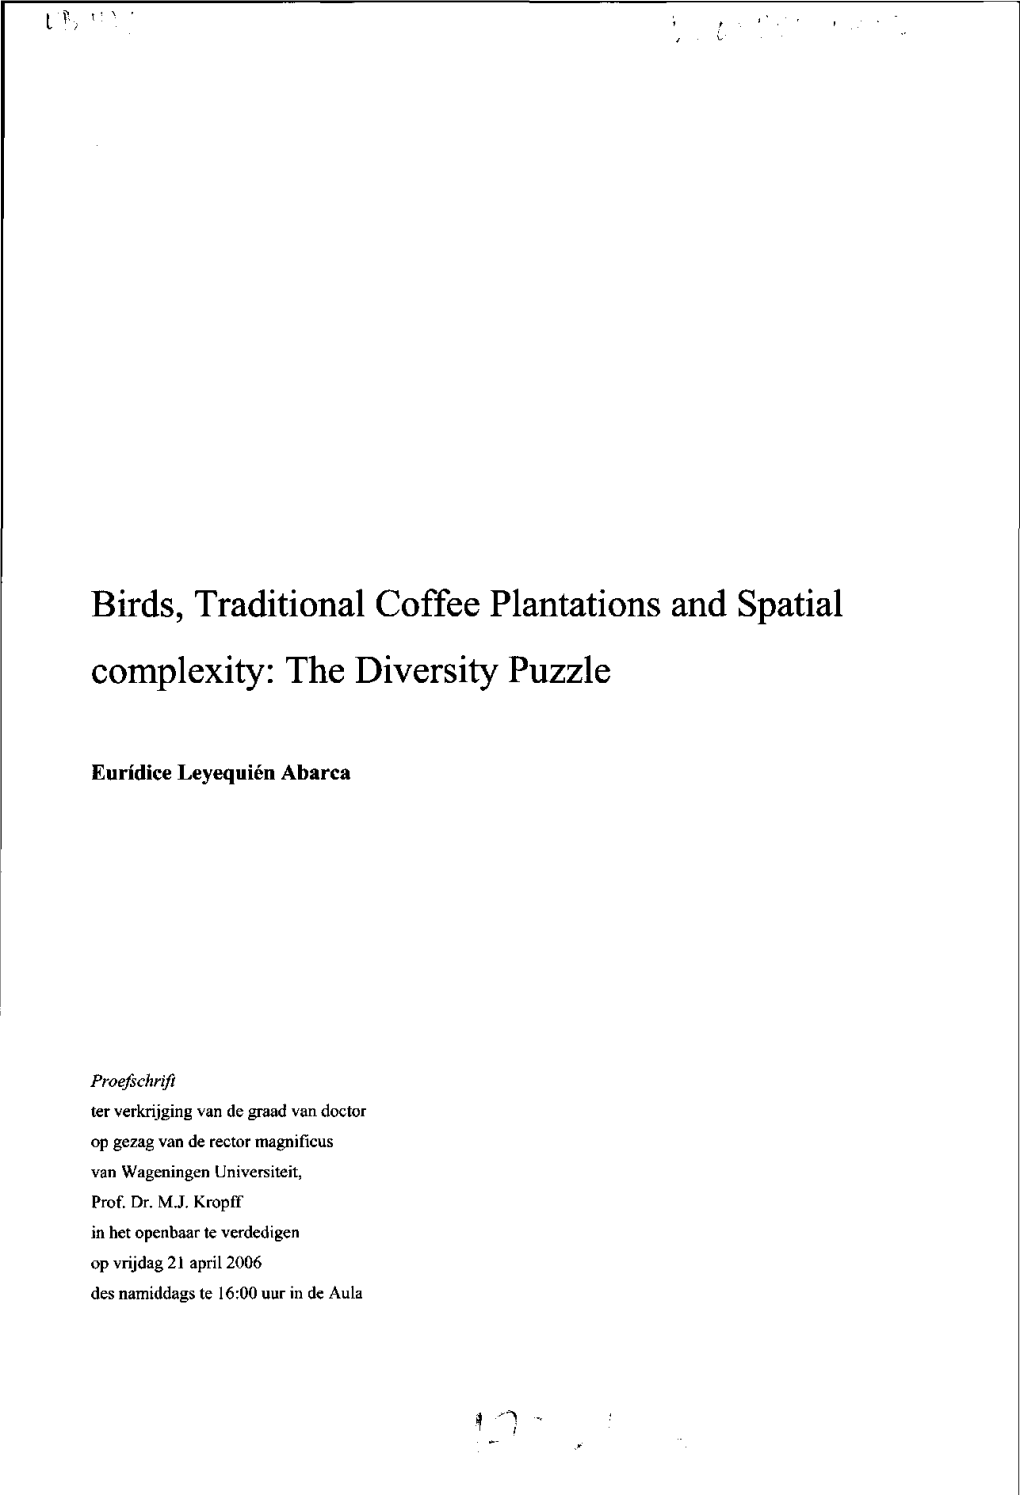 Birds, Traditional Coffee Plantations and Spatial Complexity: Thediversit Y Puzzle